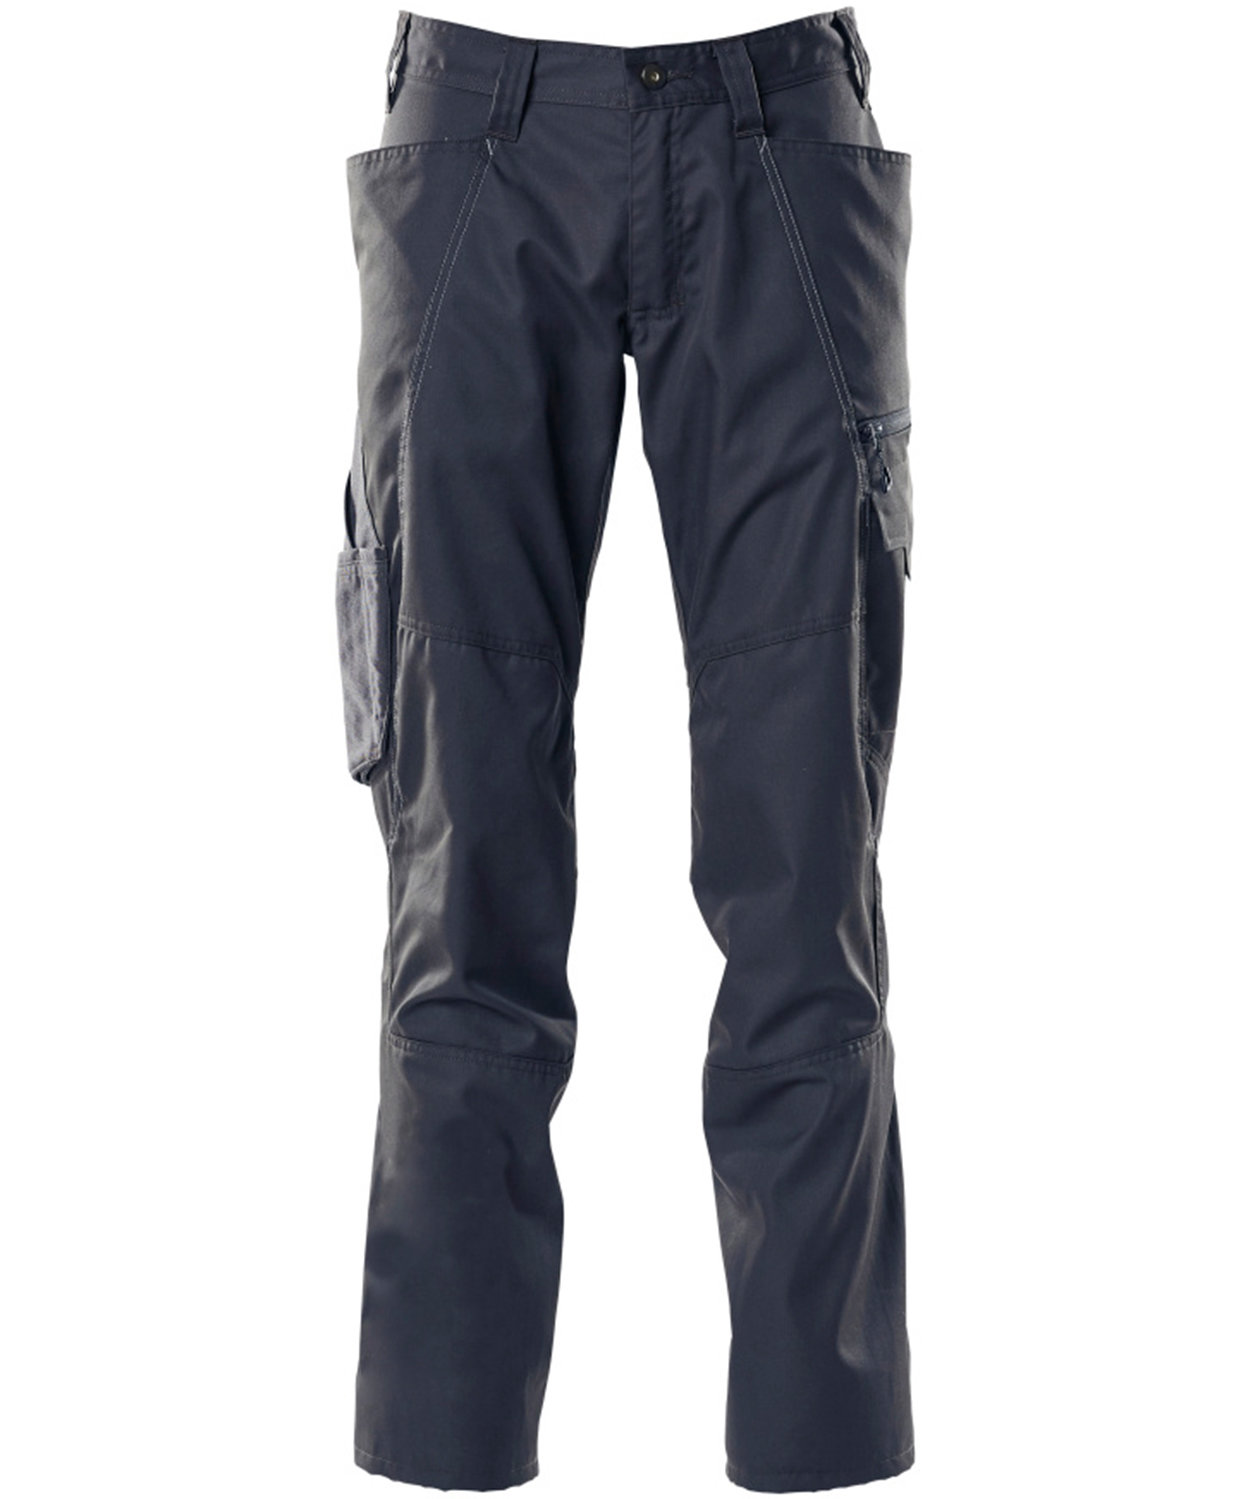 Mascot Workwear 19179 Accelerate Safe Trousers with kneepad pockets -  Clothing from MI Supplies Limited UK